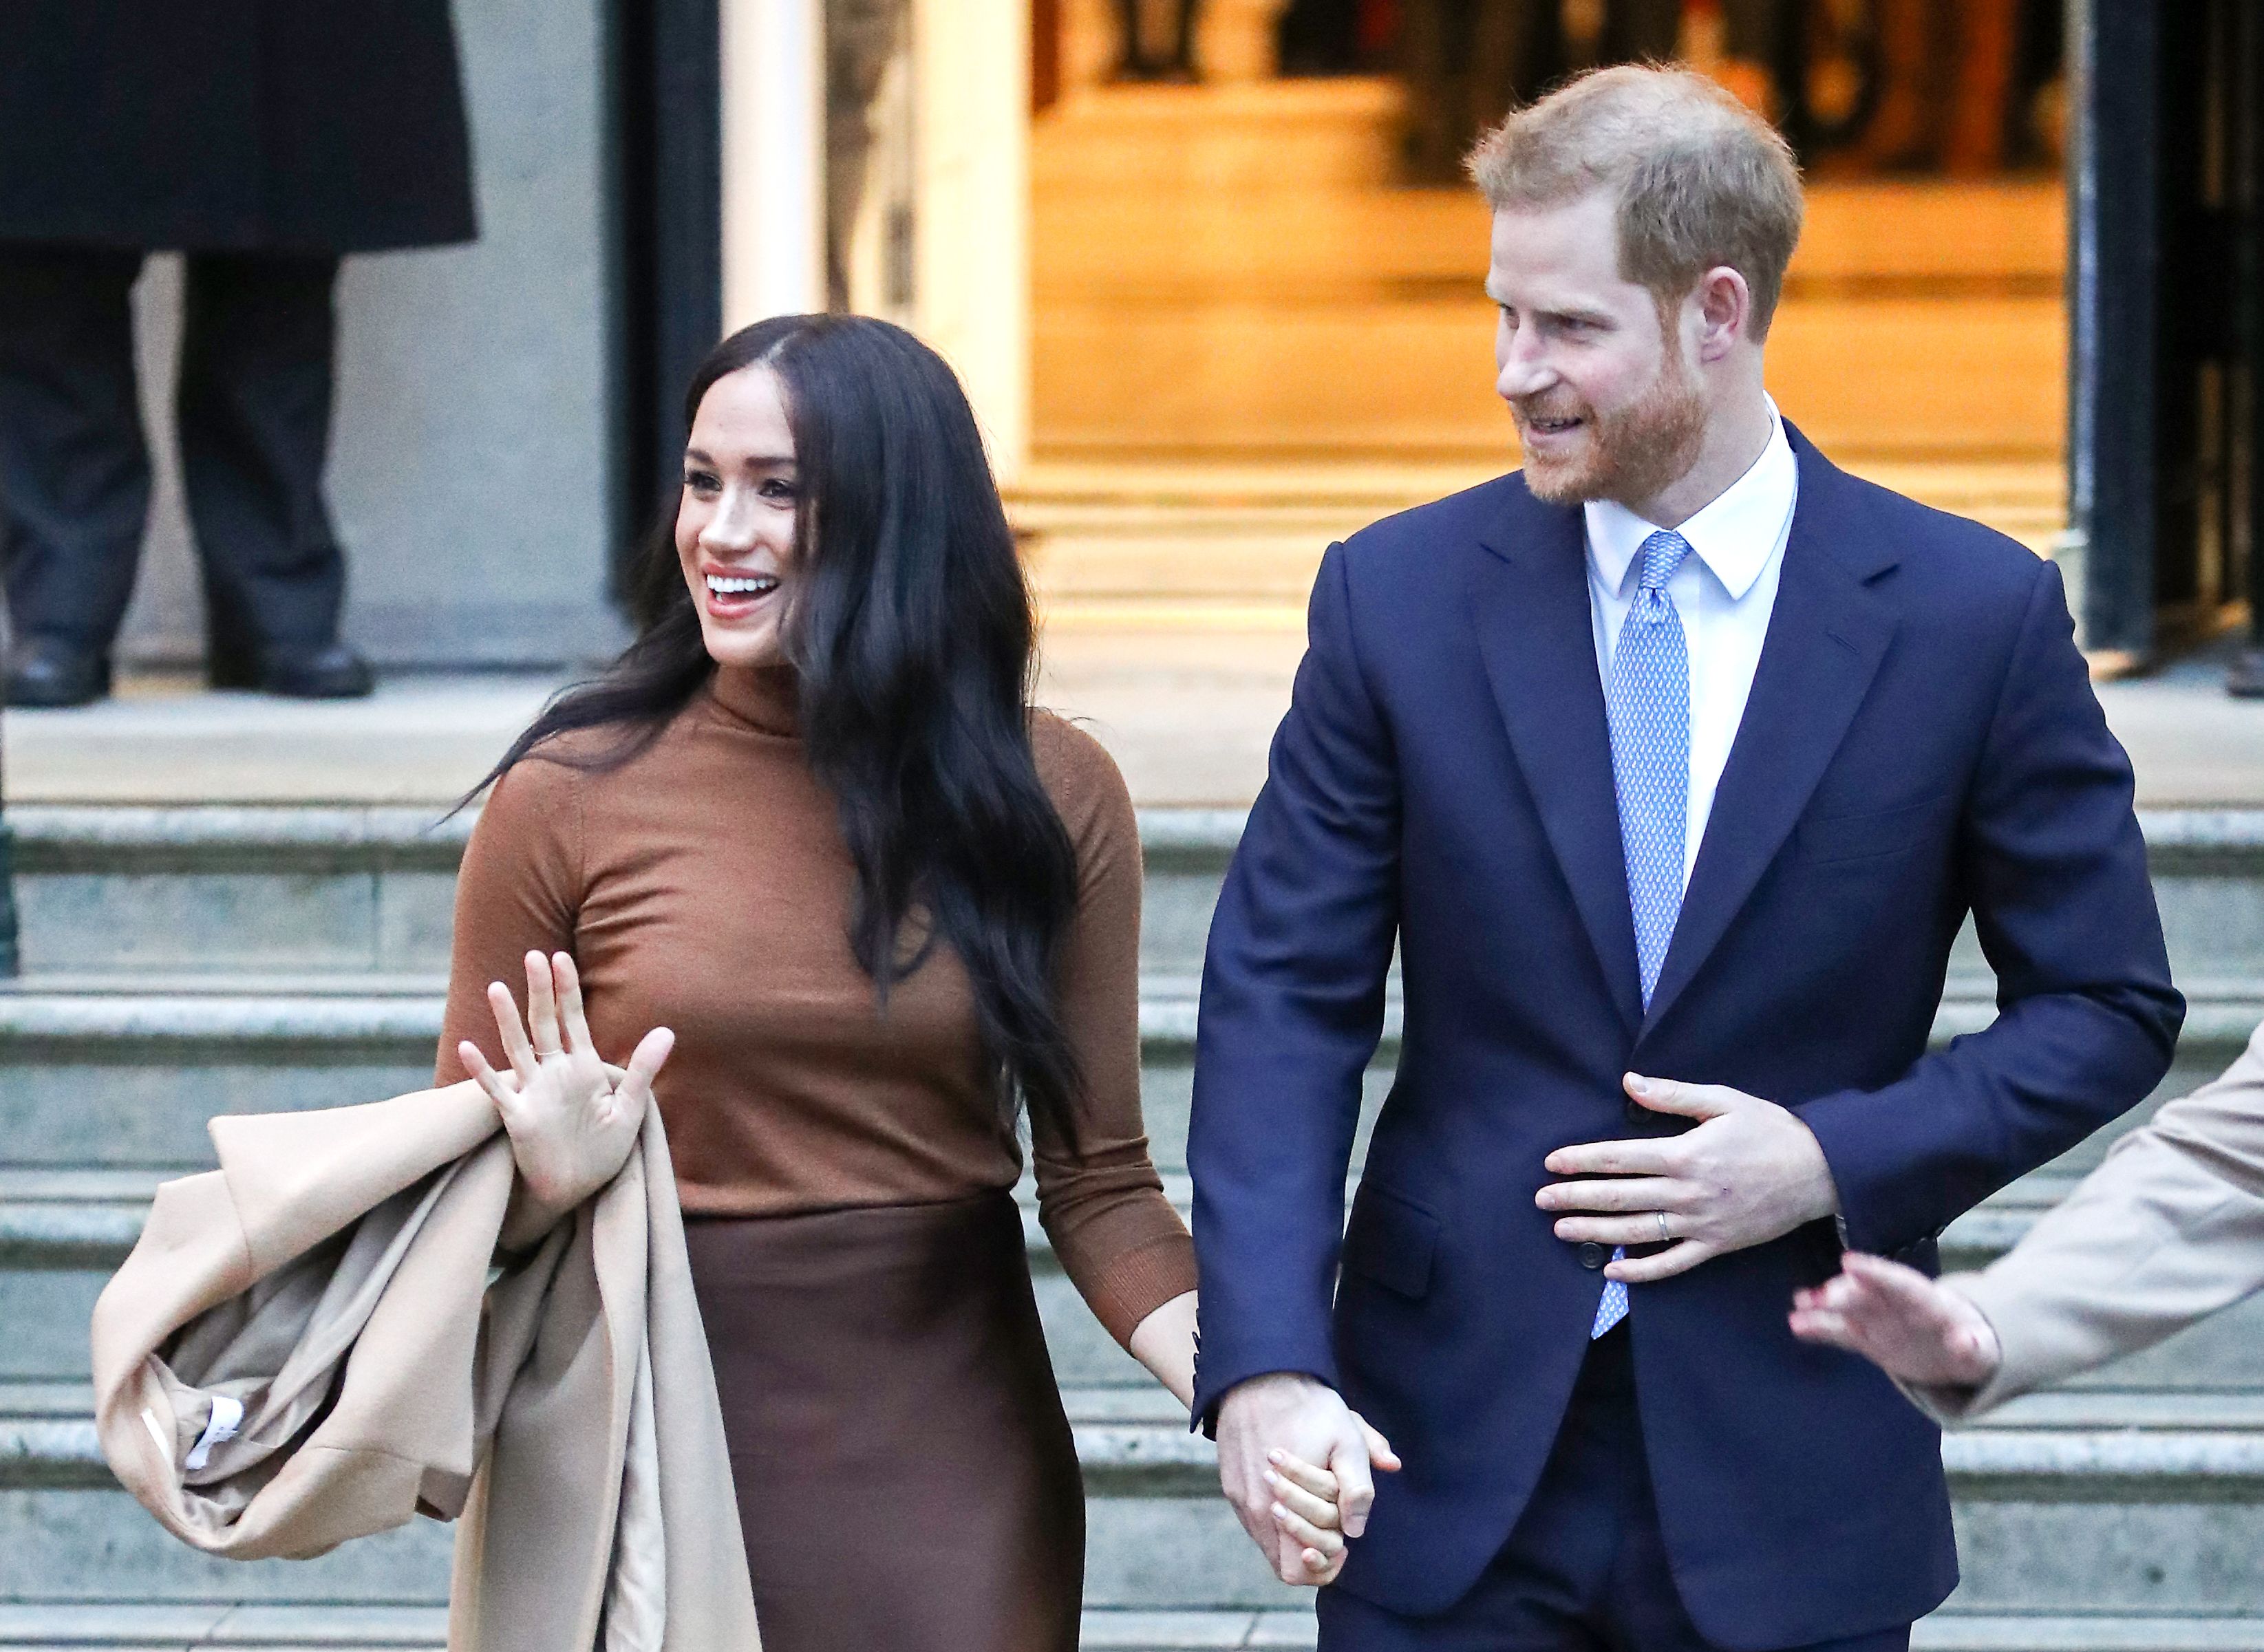 Duchess Meghan and Prince Harry depart Canada House on January 07, 2020, in London, England | Photo: Chris Jackson/Getty Images